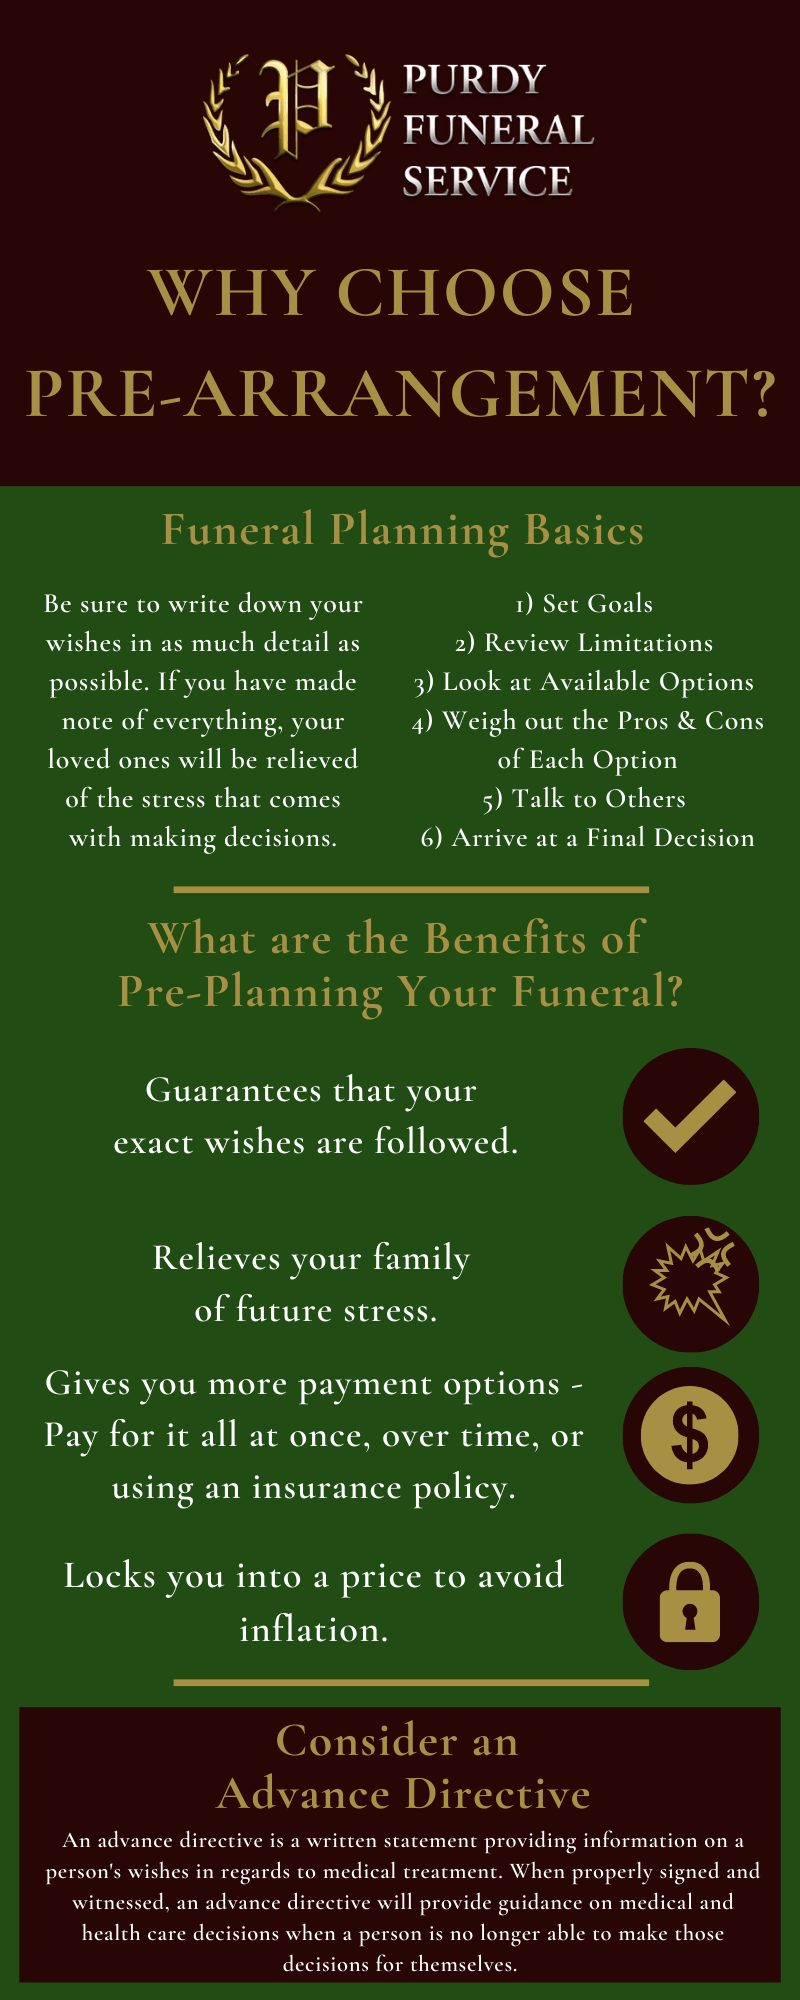 Purdy Funeral Service Funeral Pre-Arrangement Infographic